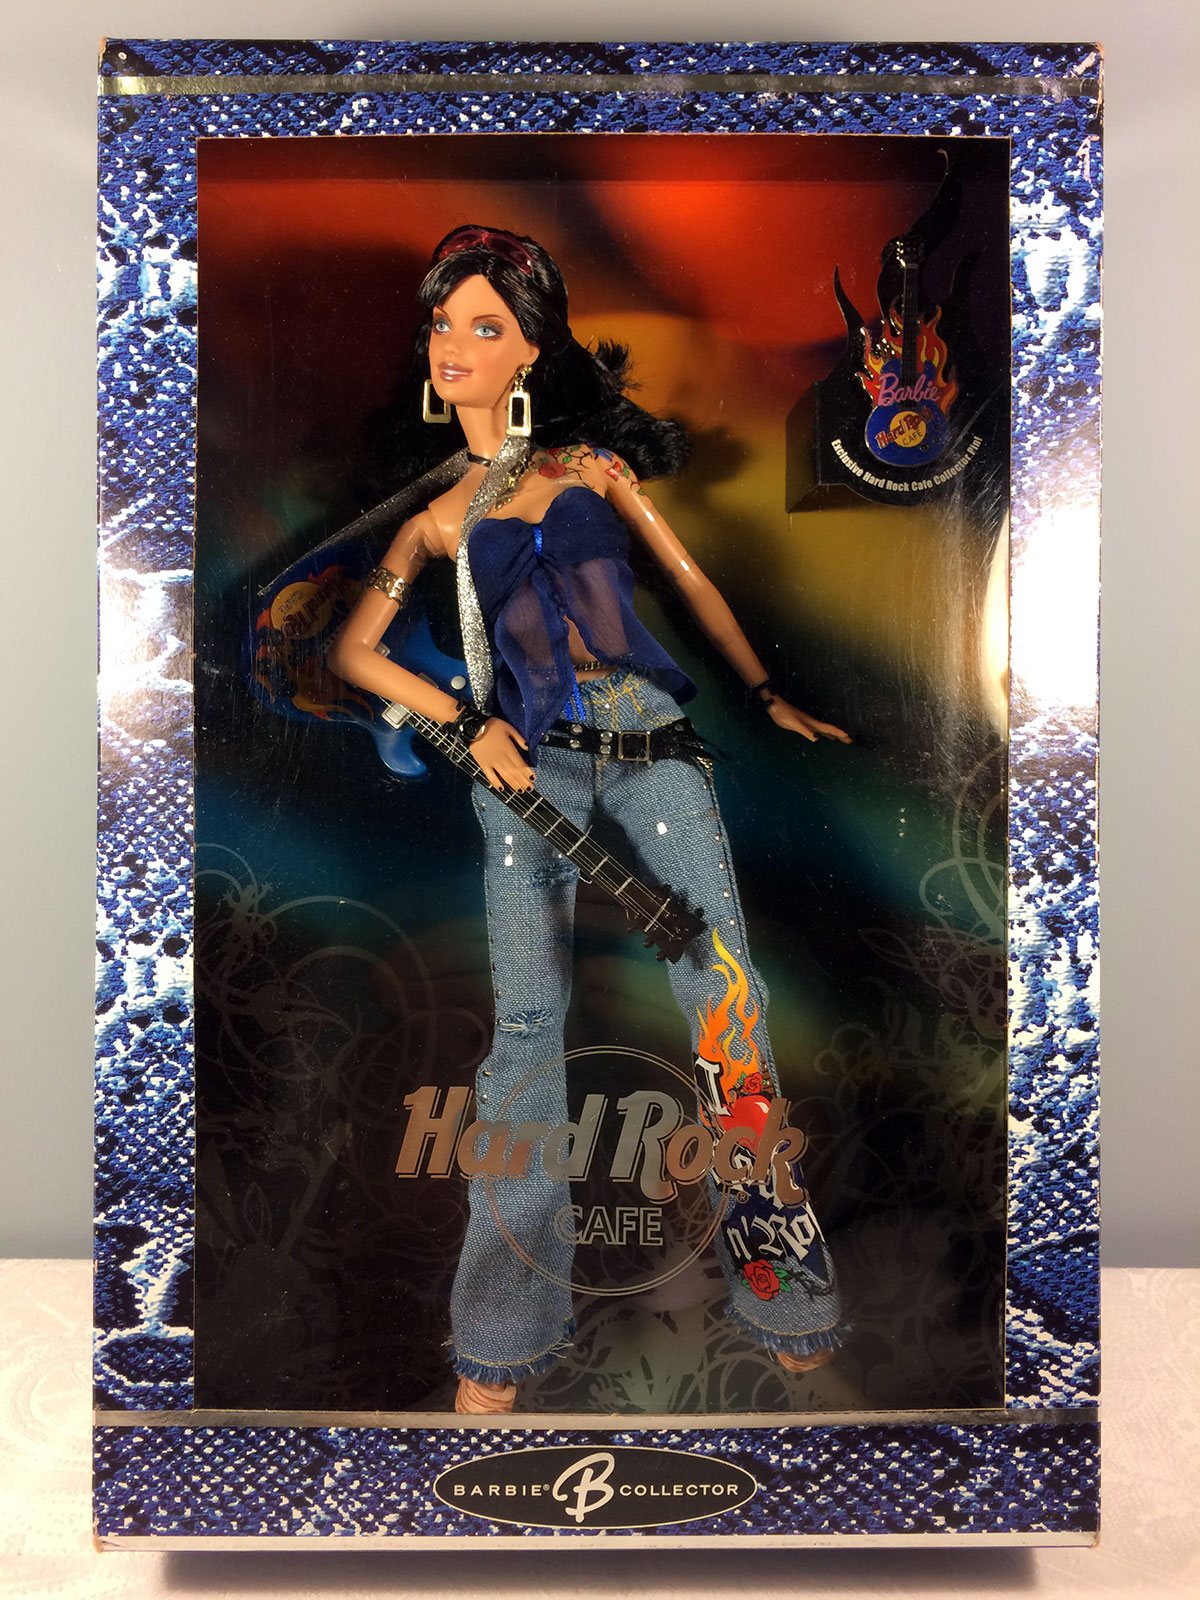 Hard Rock Cafe Barbie Doll #3 - Perfectory Barbie Edition